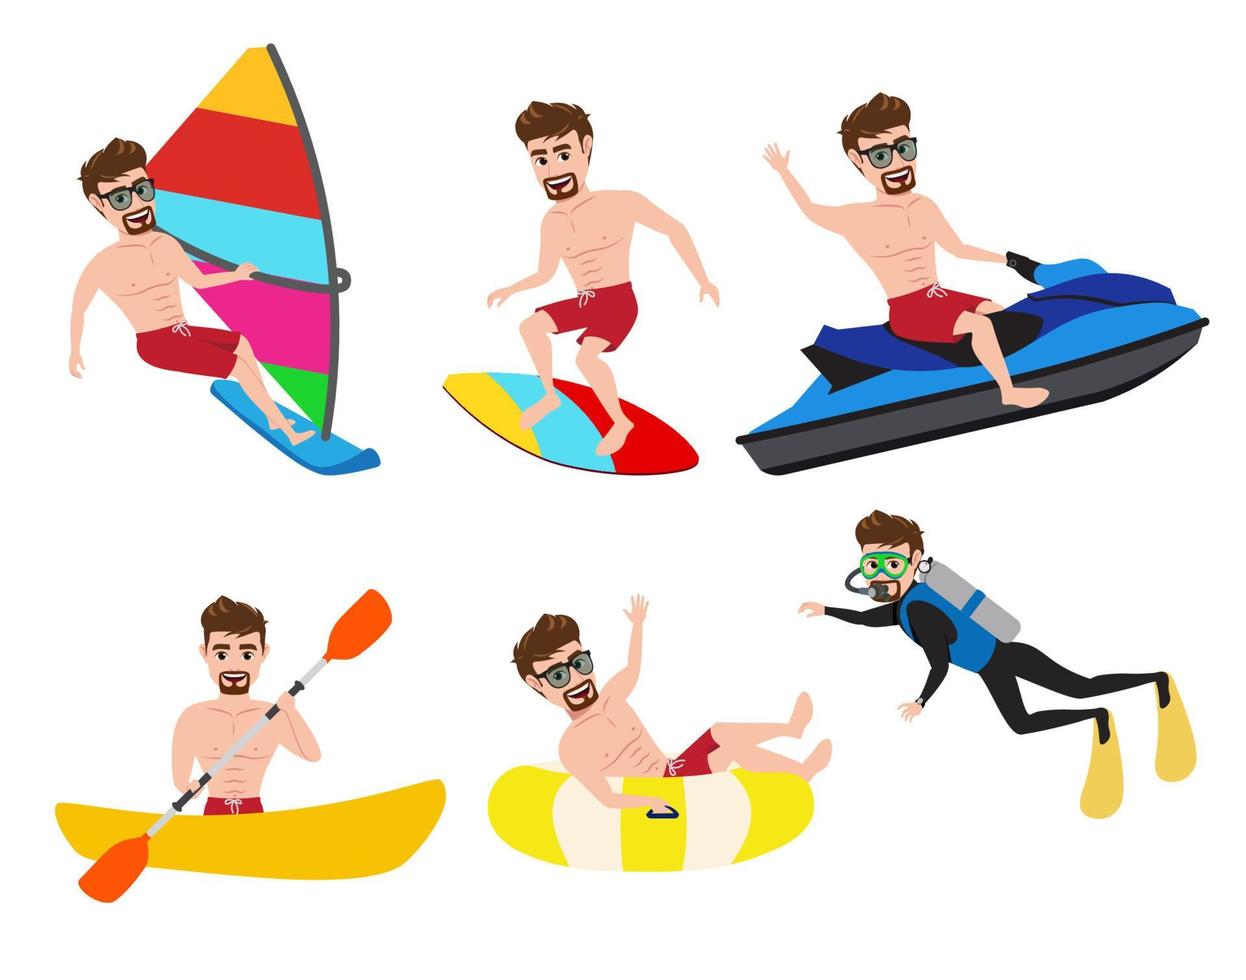 Summer activity man character vector set.  Male character in summer water sport activities like surfing, jet skiing, kayaking, boating, scuba diving and canoeing isolated in white background.